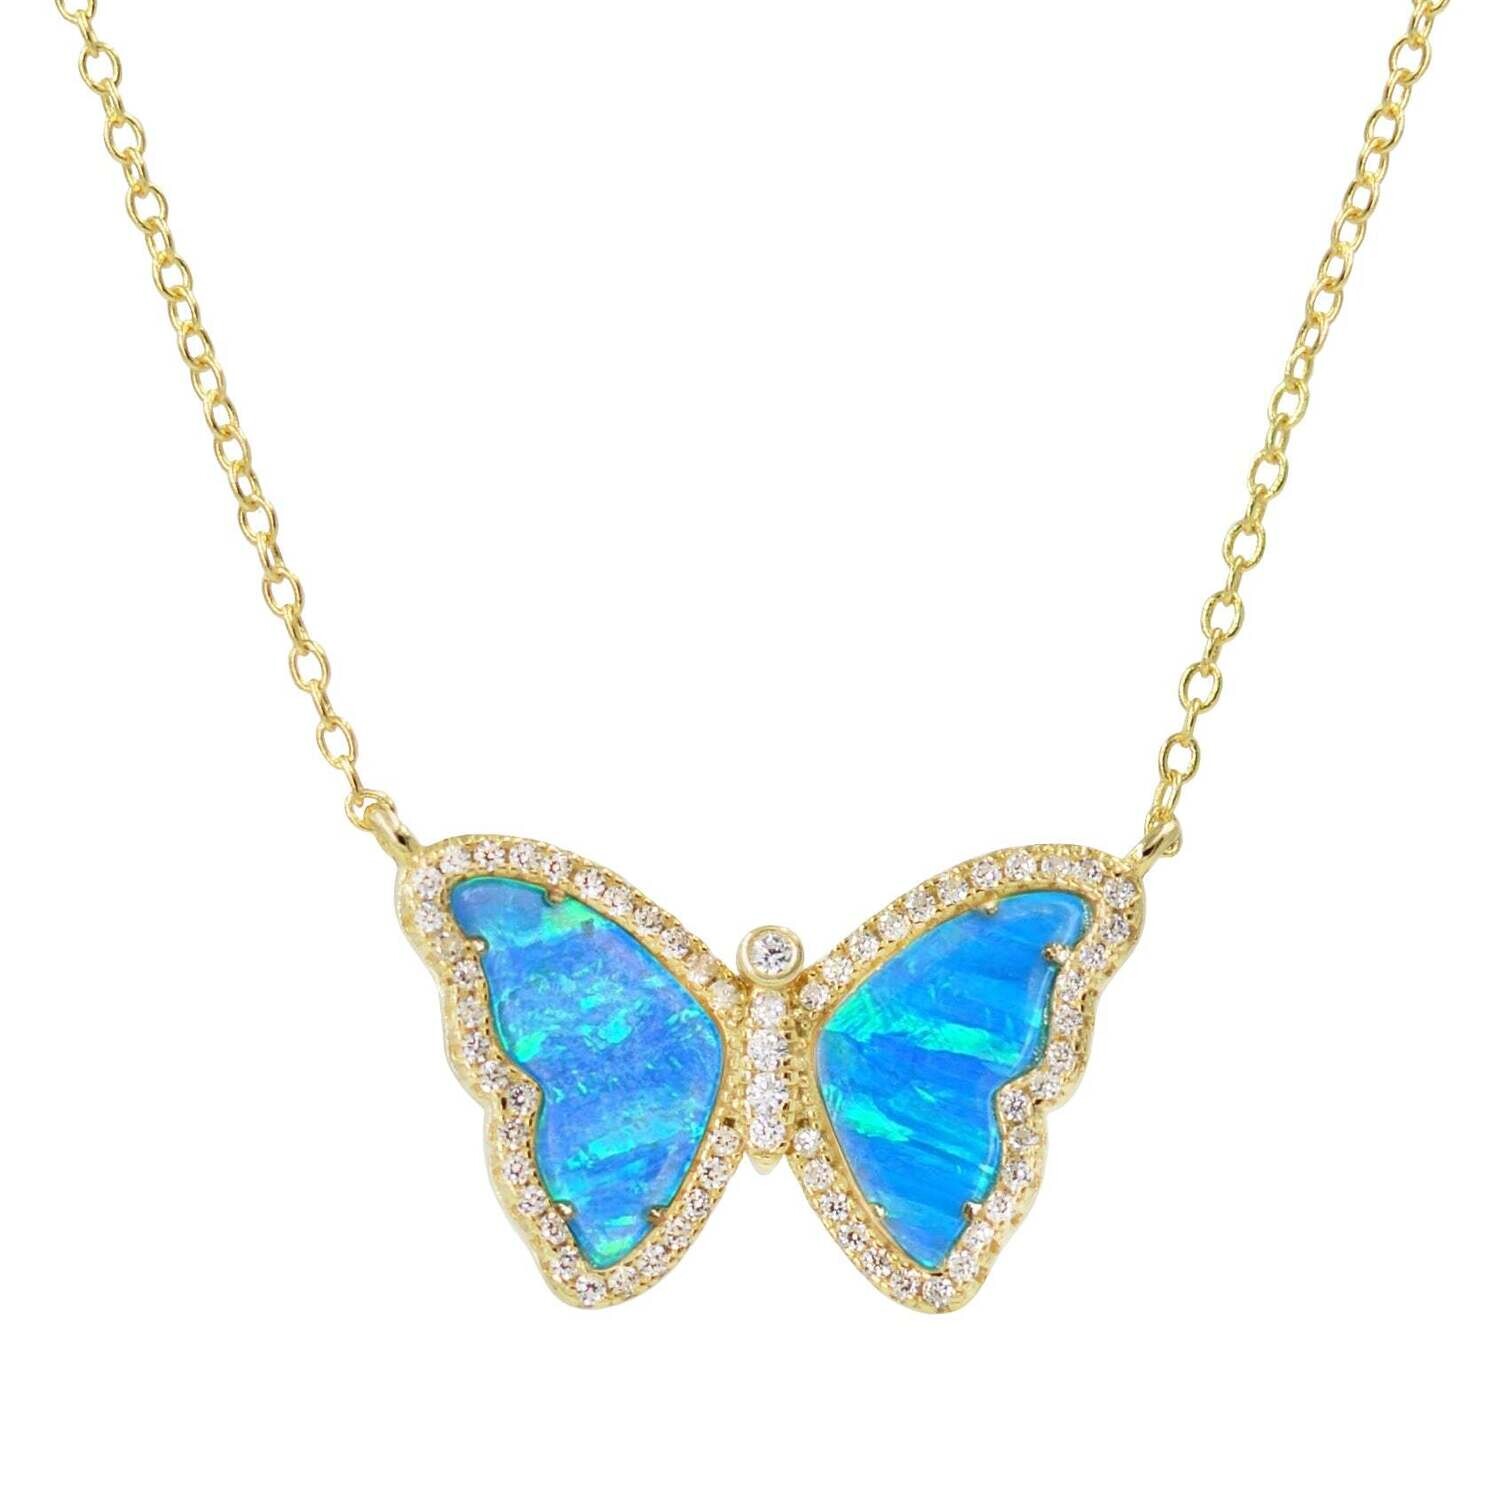 Kamaria Blue-Green Opal Butterfly Necklace with Stripes (Gold)